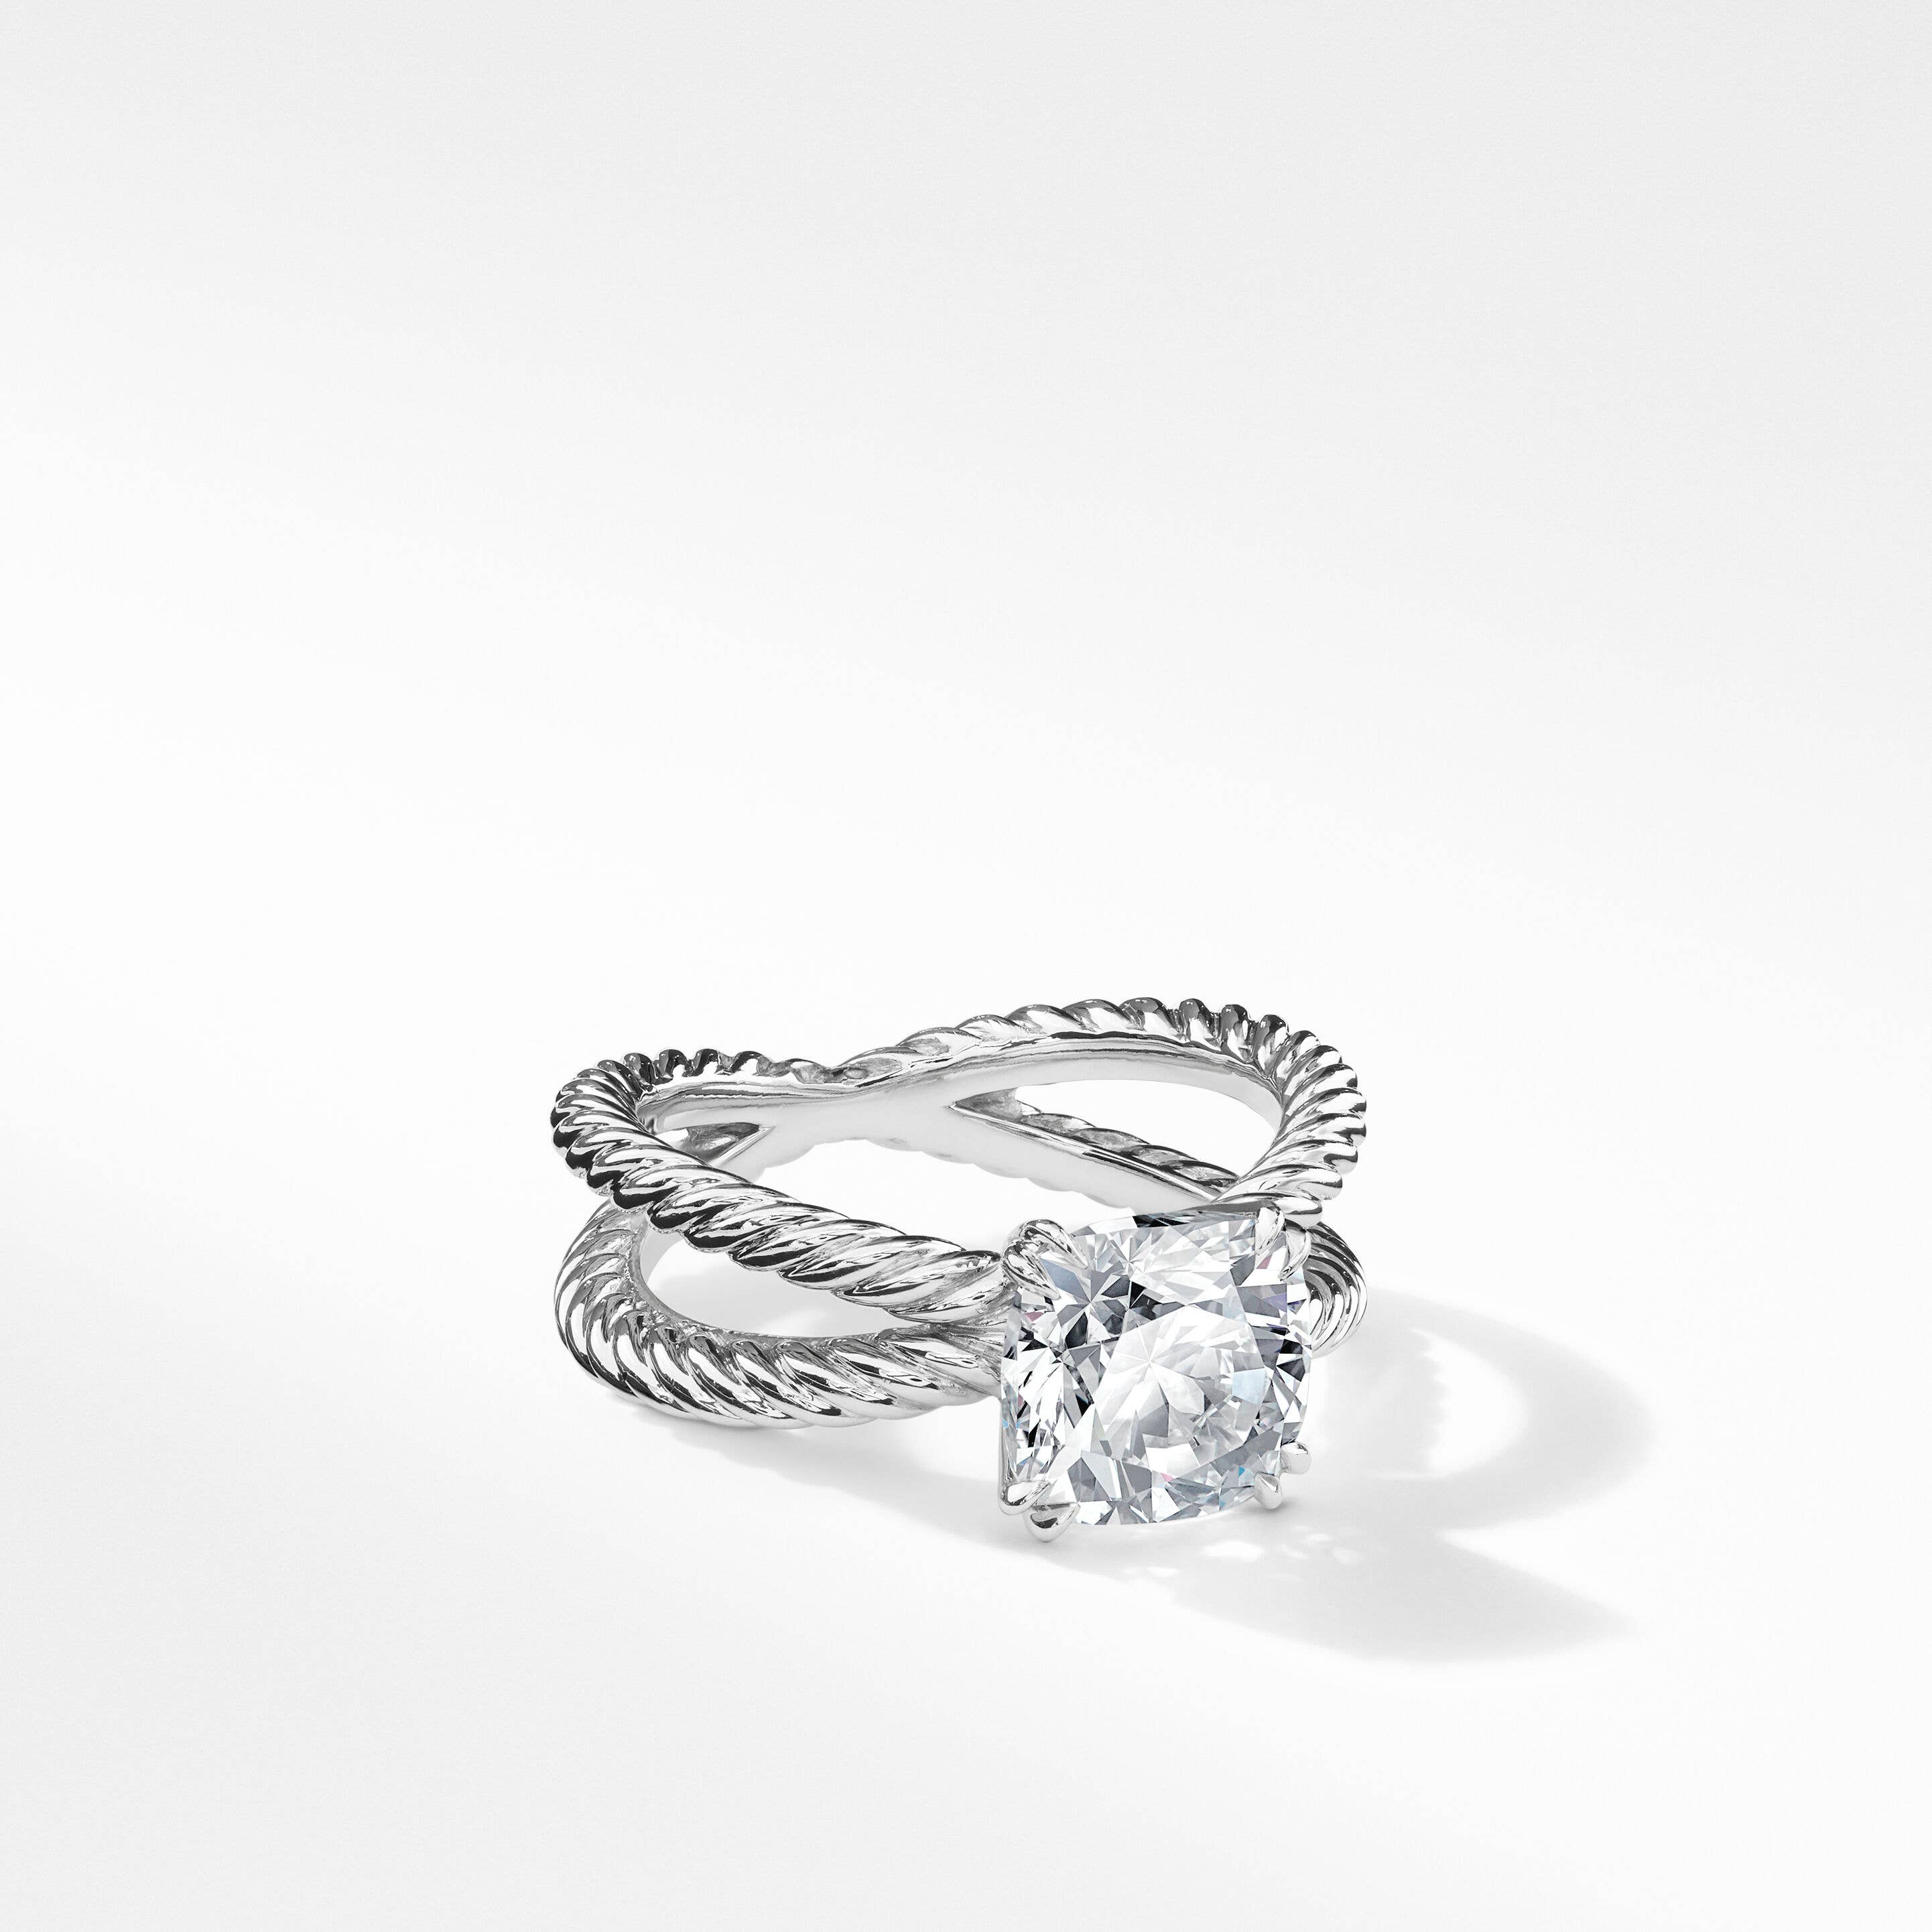 DY Crossover® Engagement Ring in Platinum, Cushion